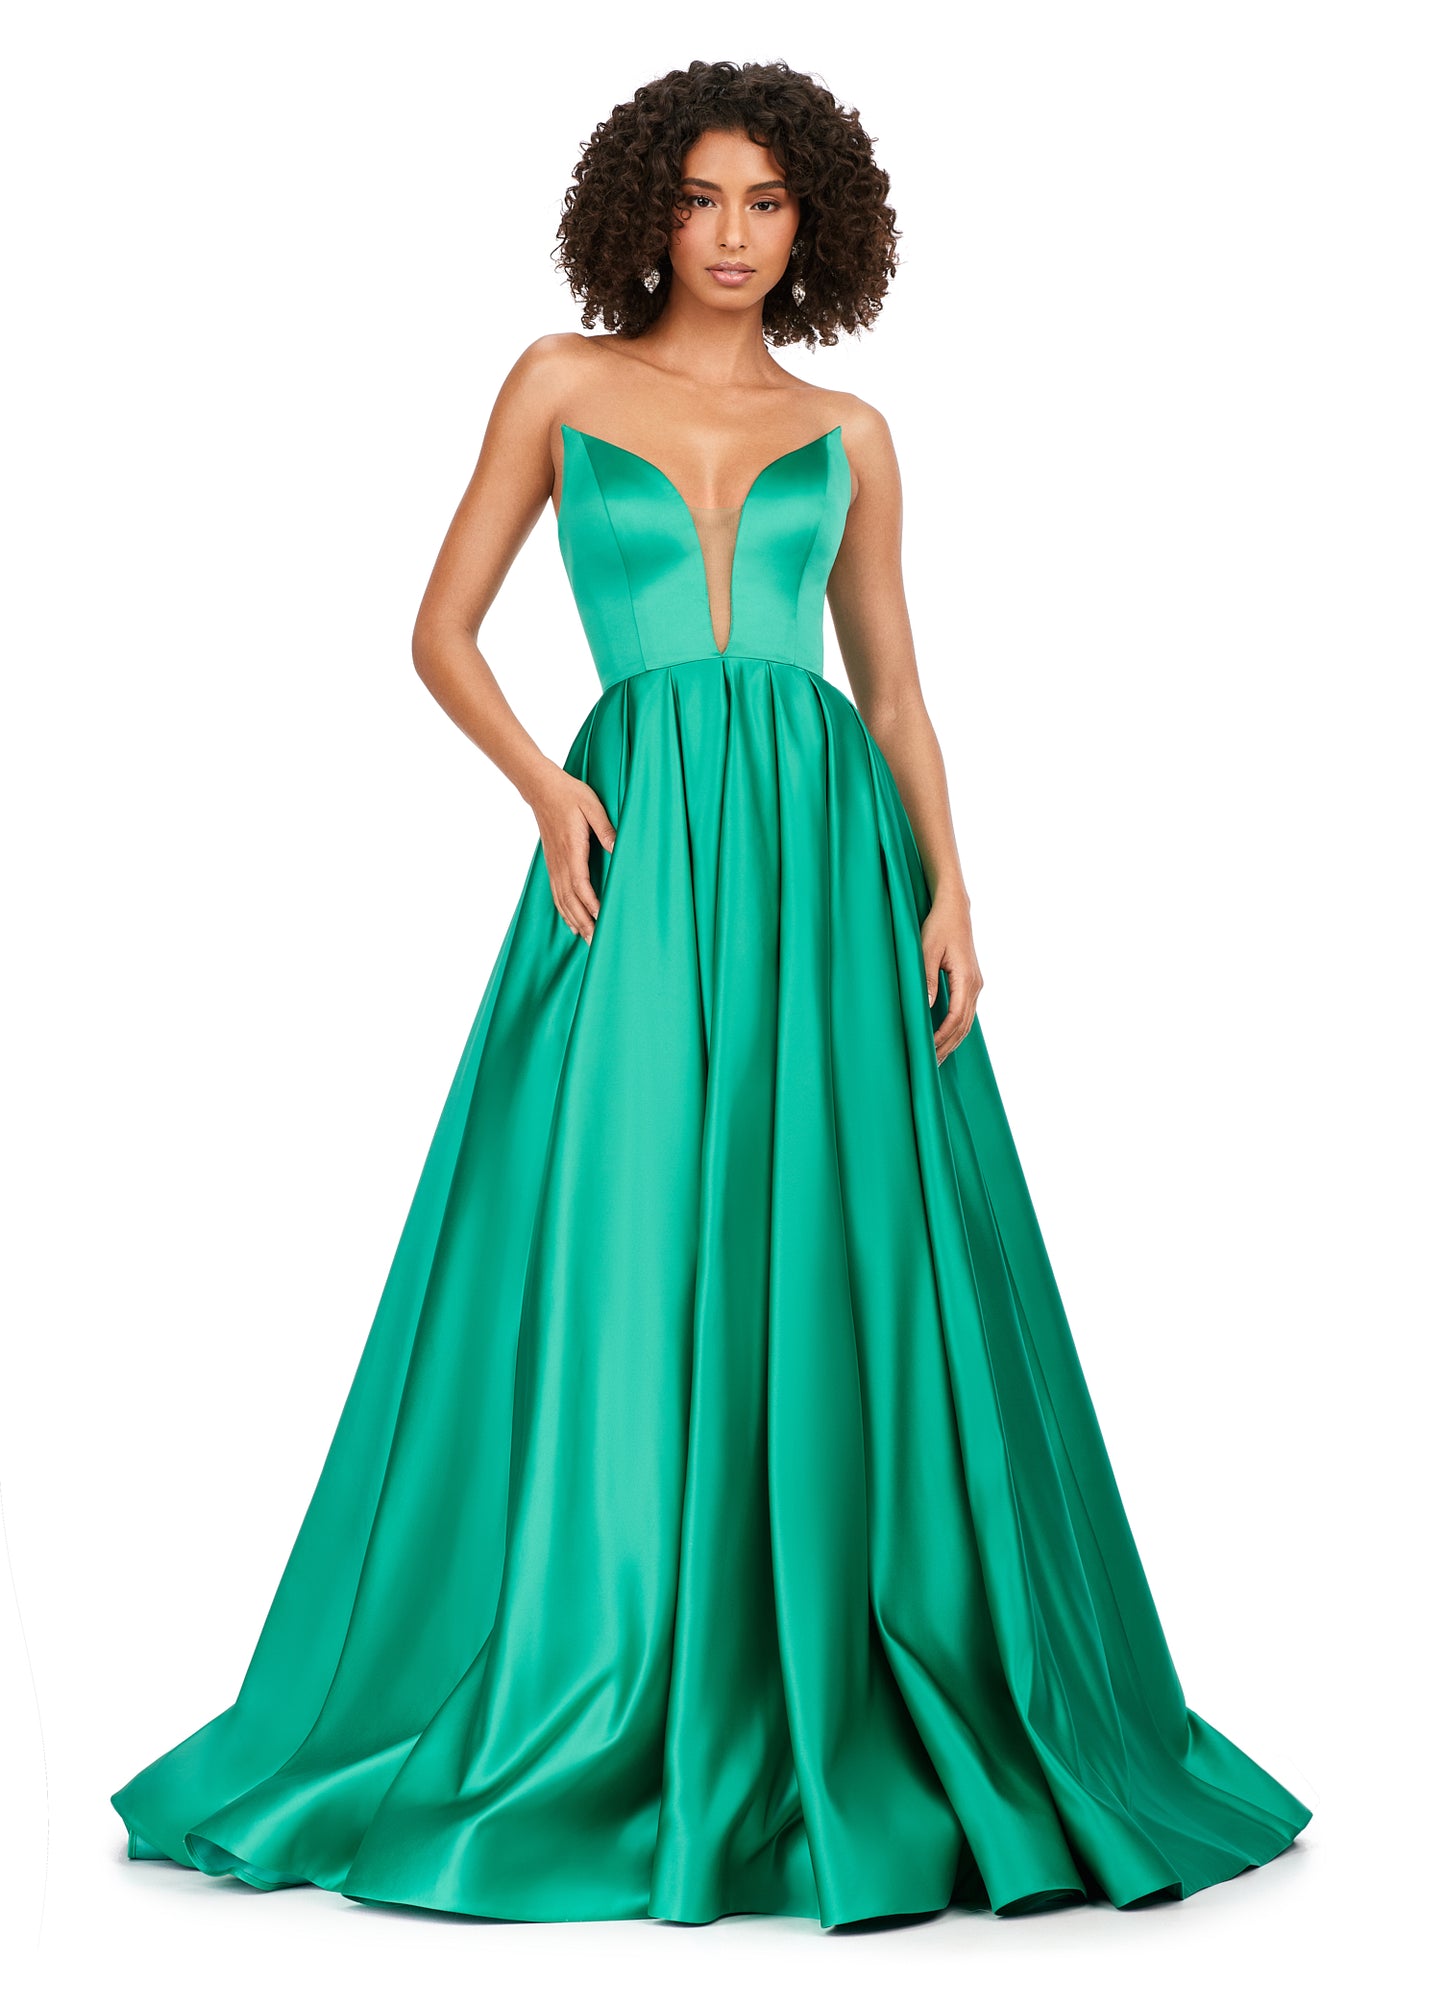 Ashley Lauren 11250 Strapless Plunging Neckline Heavy Satin A-Line Sweeping Train Ballgown Formal Dress. This satin ball gown features an elegant illusion v-neckline. The full A-Line skirt has pockets and a sweeping train.